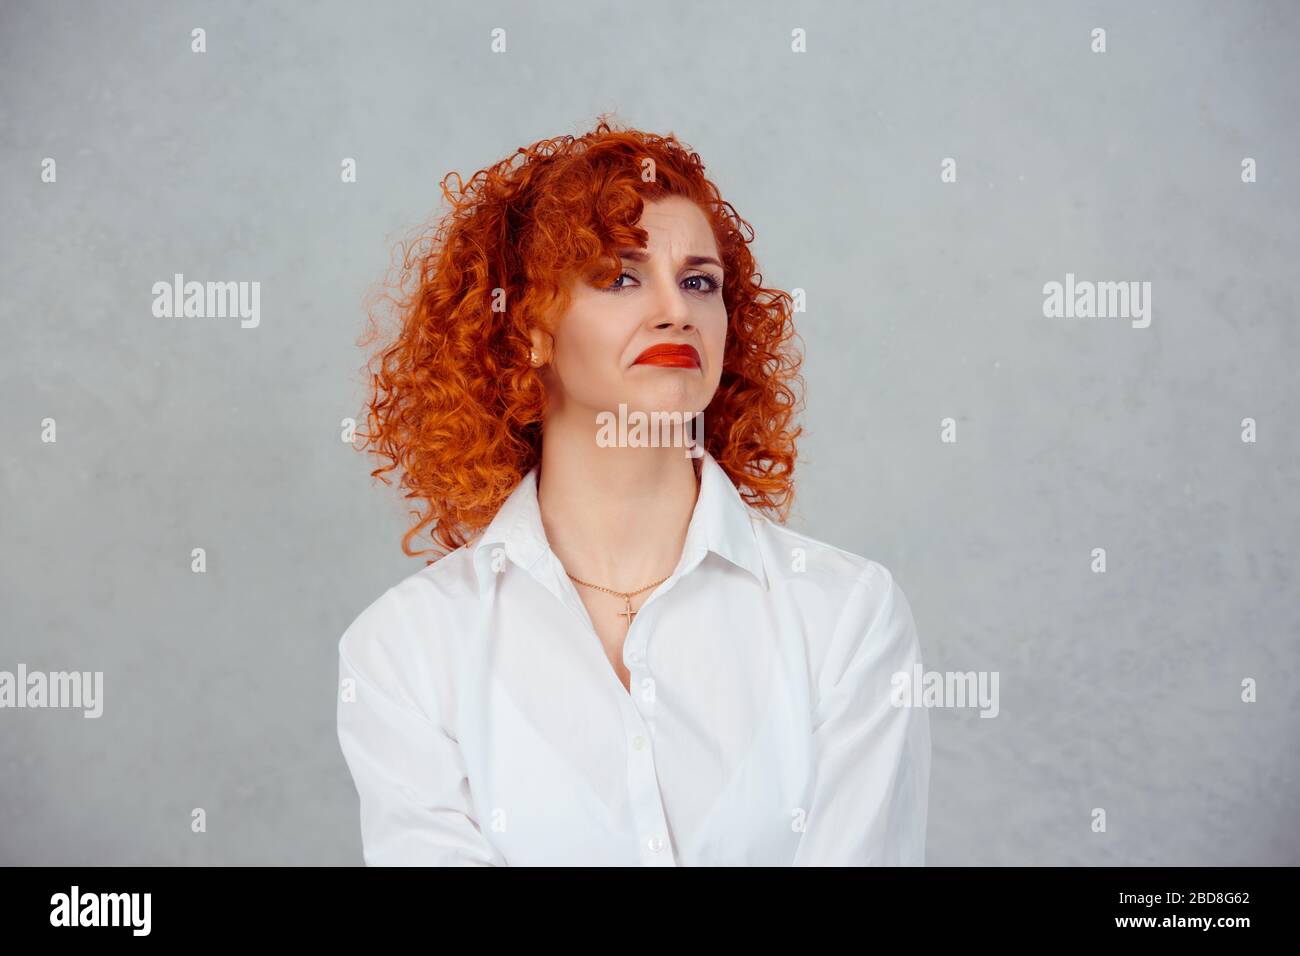 Confused woman. Closeup portrait unhappy young red head curly girl person shrugging shoulders I don't know concept on gray background. Negative human Stock Photo